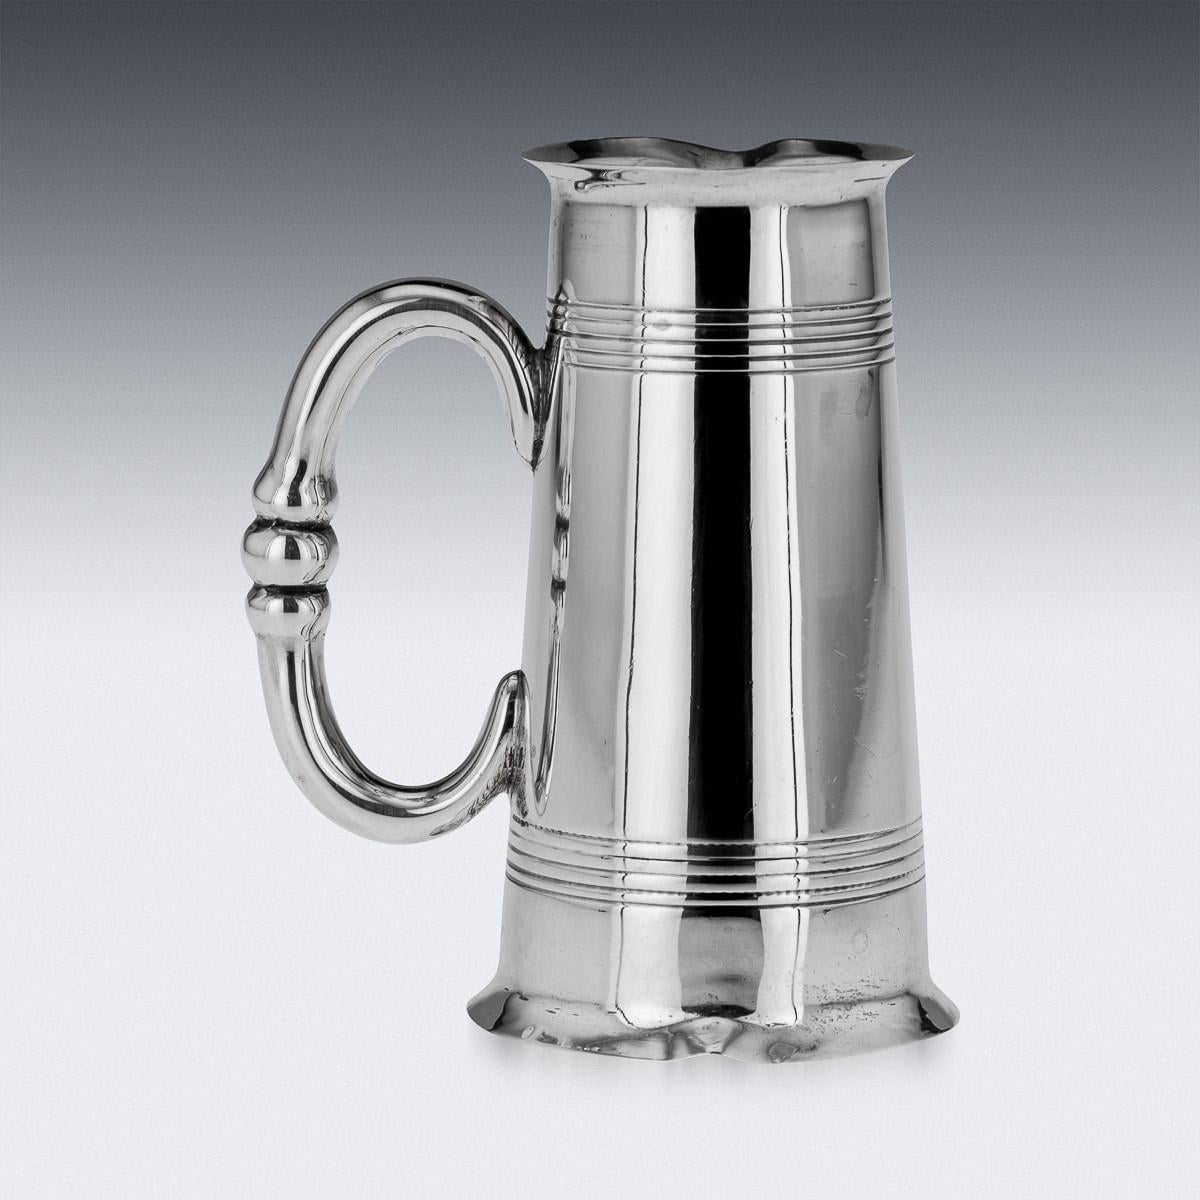 20th Century Edwardian Solid Silver Drinks Measure, Birmingham, c.1906 In Good Condition For Sale In Royal Tunbridge Wells, Kent